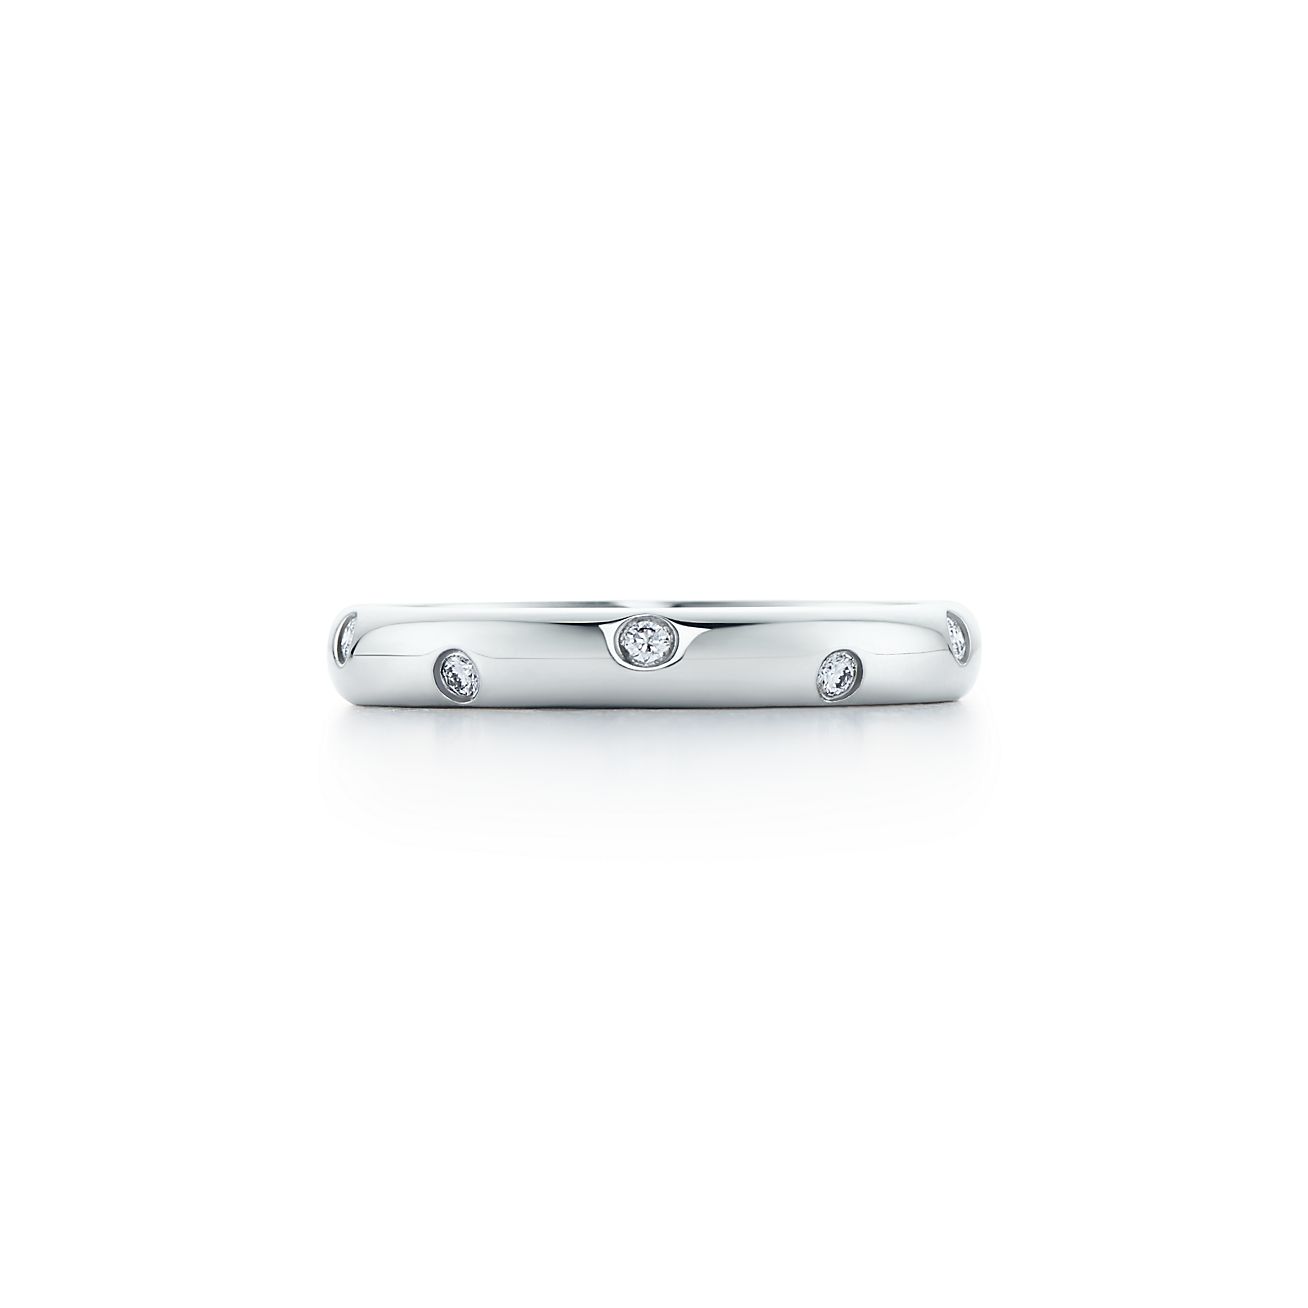 Etoile band ring in platinum with 